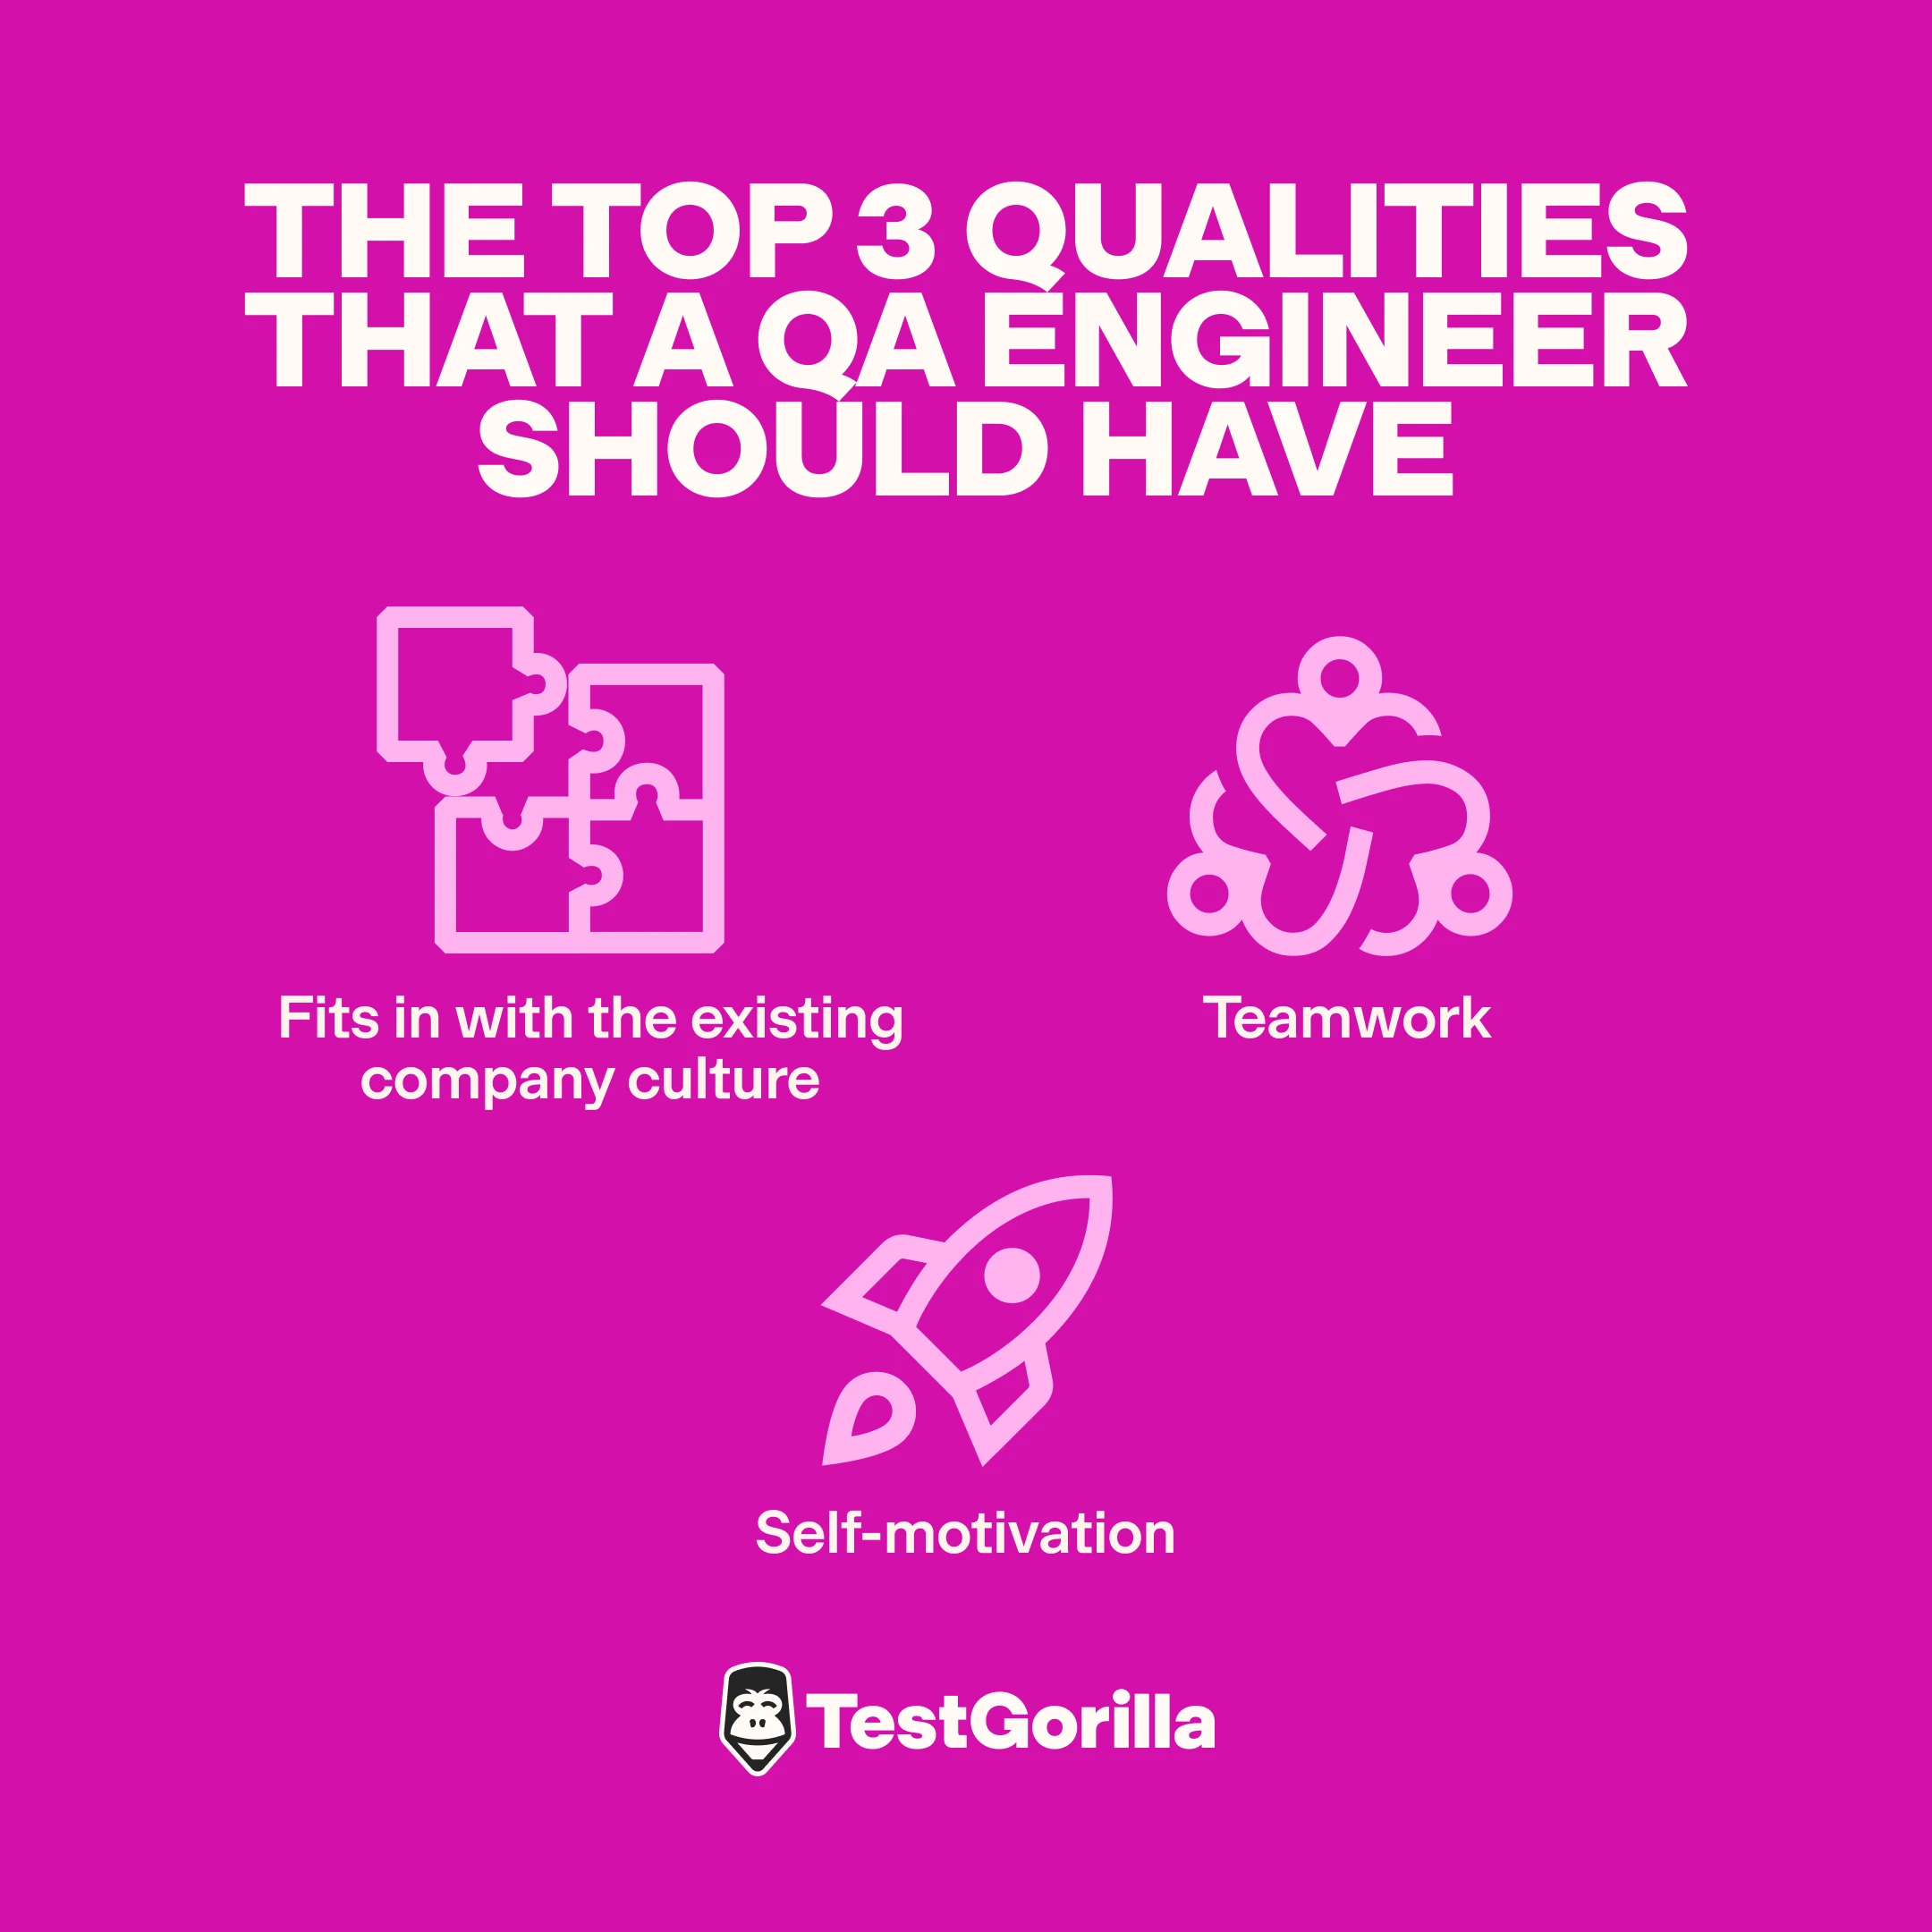 The top qualities that a QA engineer should have